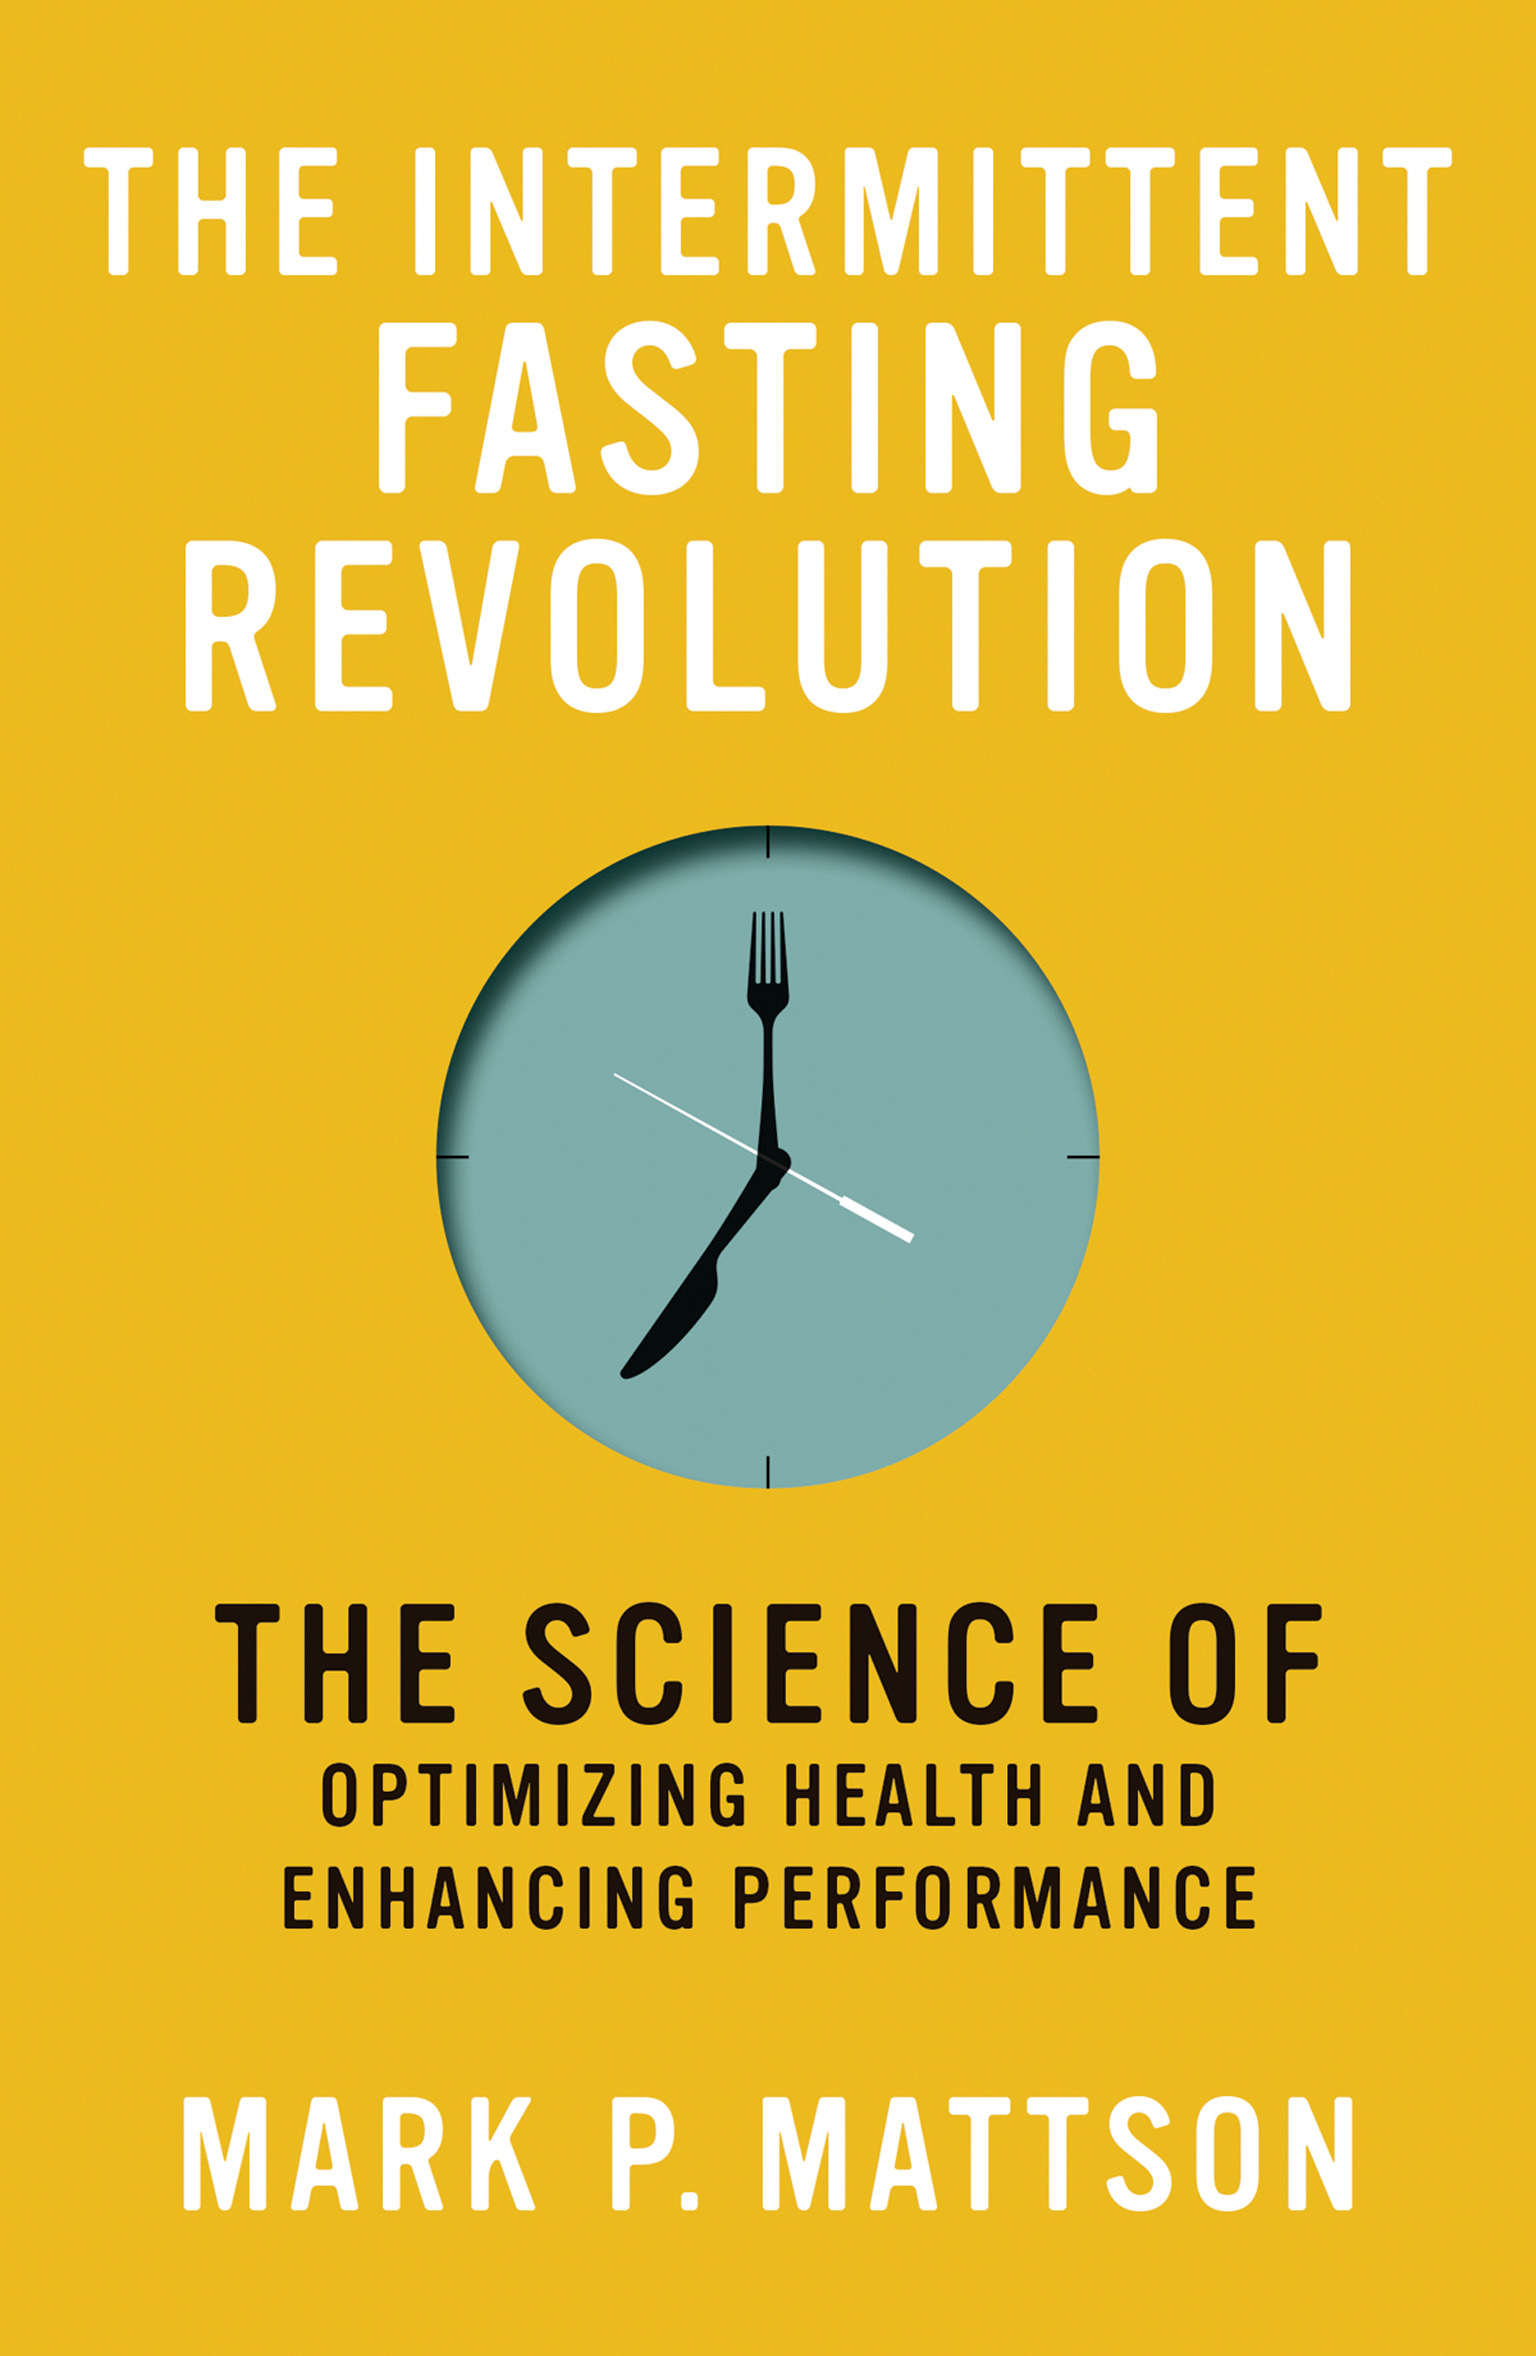 The Intermittent Fasting Revolution : The Science of Optimizing Health and Enhancing Performance | Mattson, Mark P.